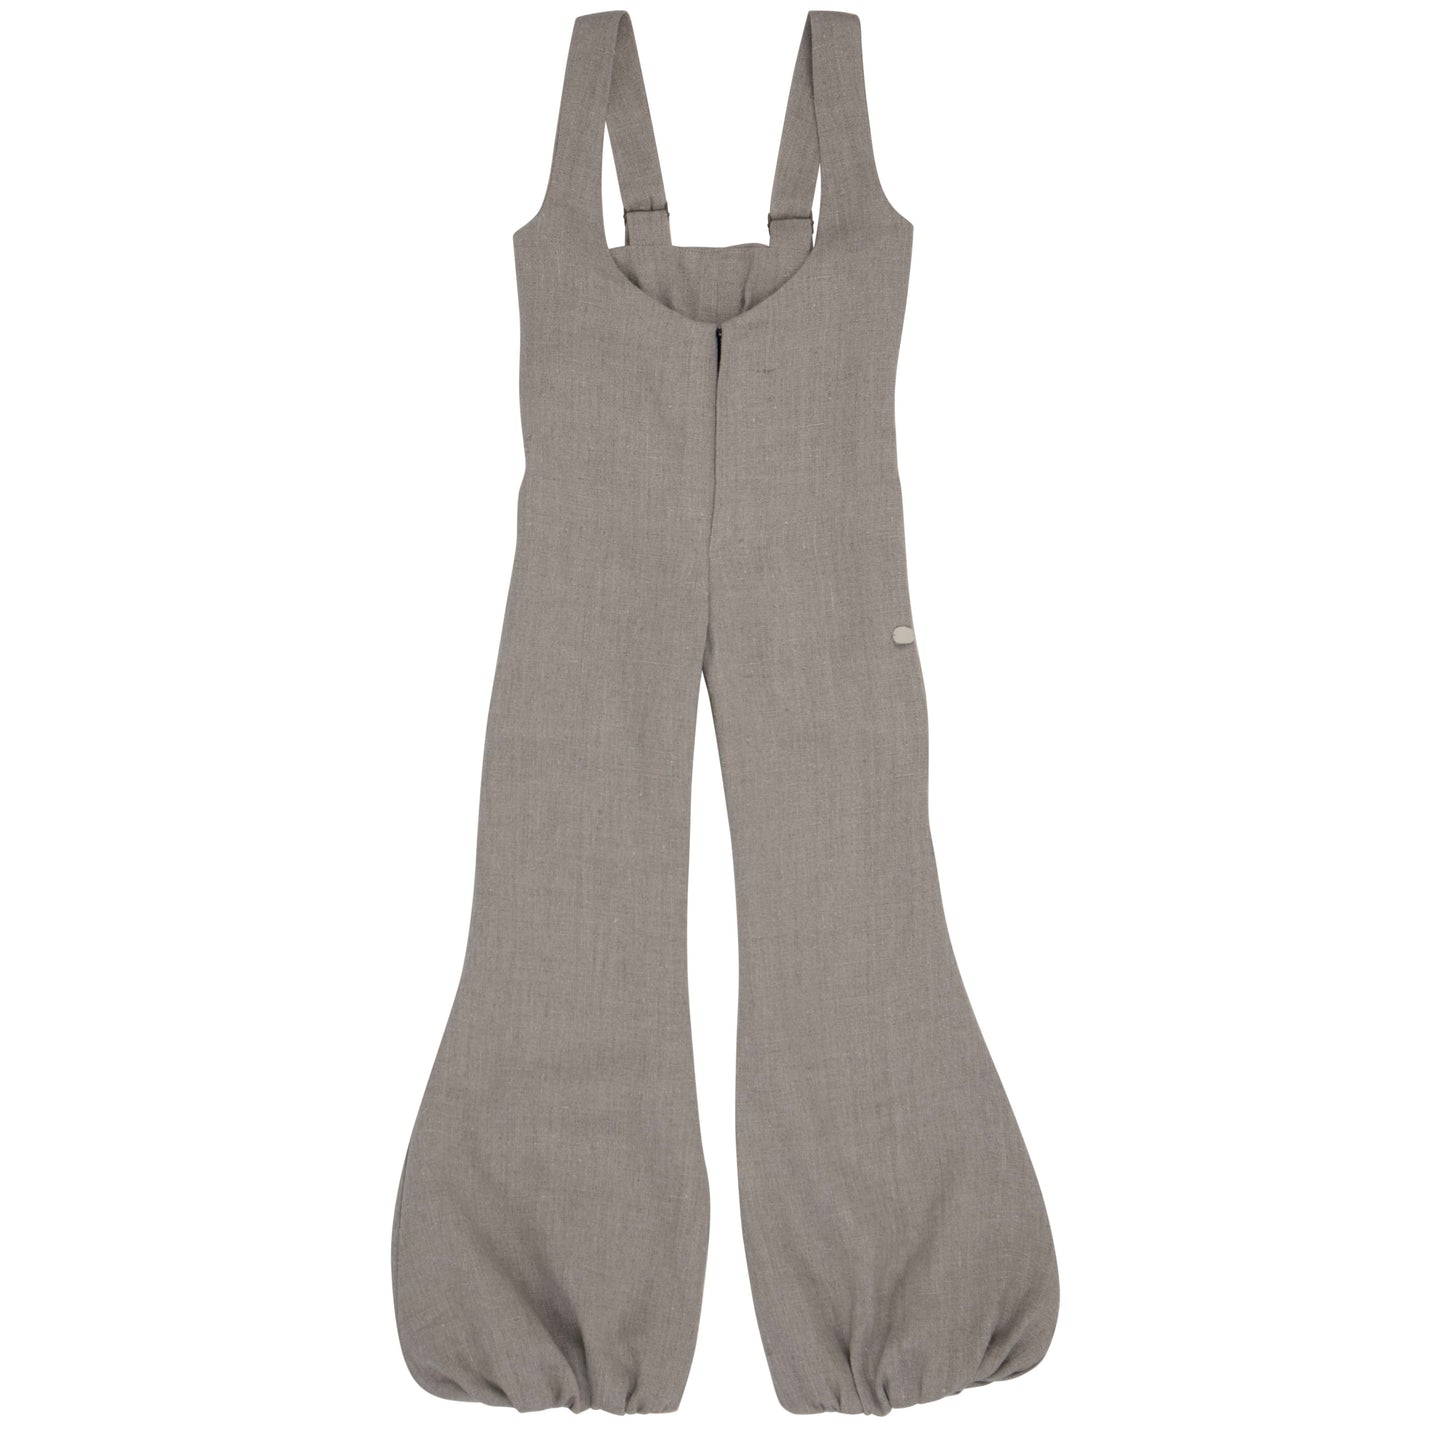 UPA DOROTHY overalls MADE TO ORDER